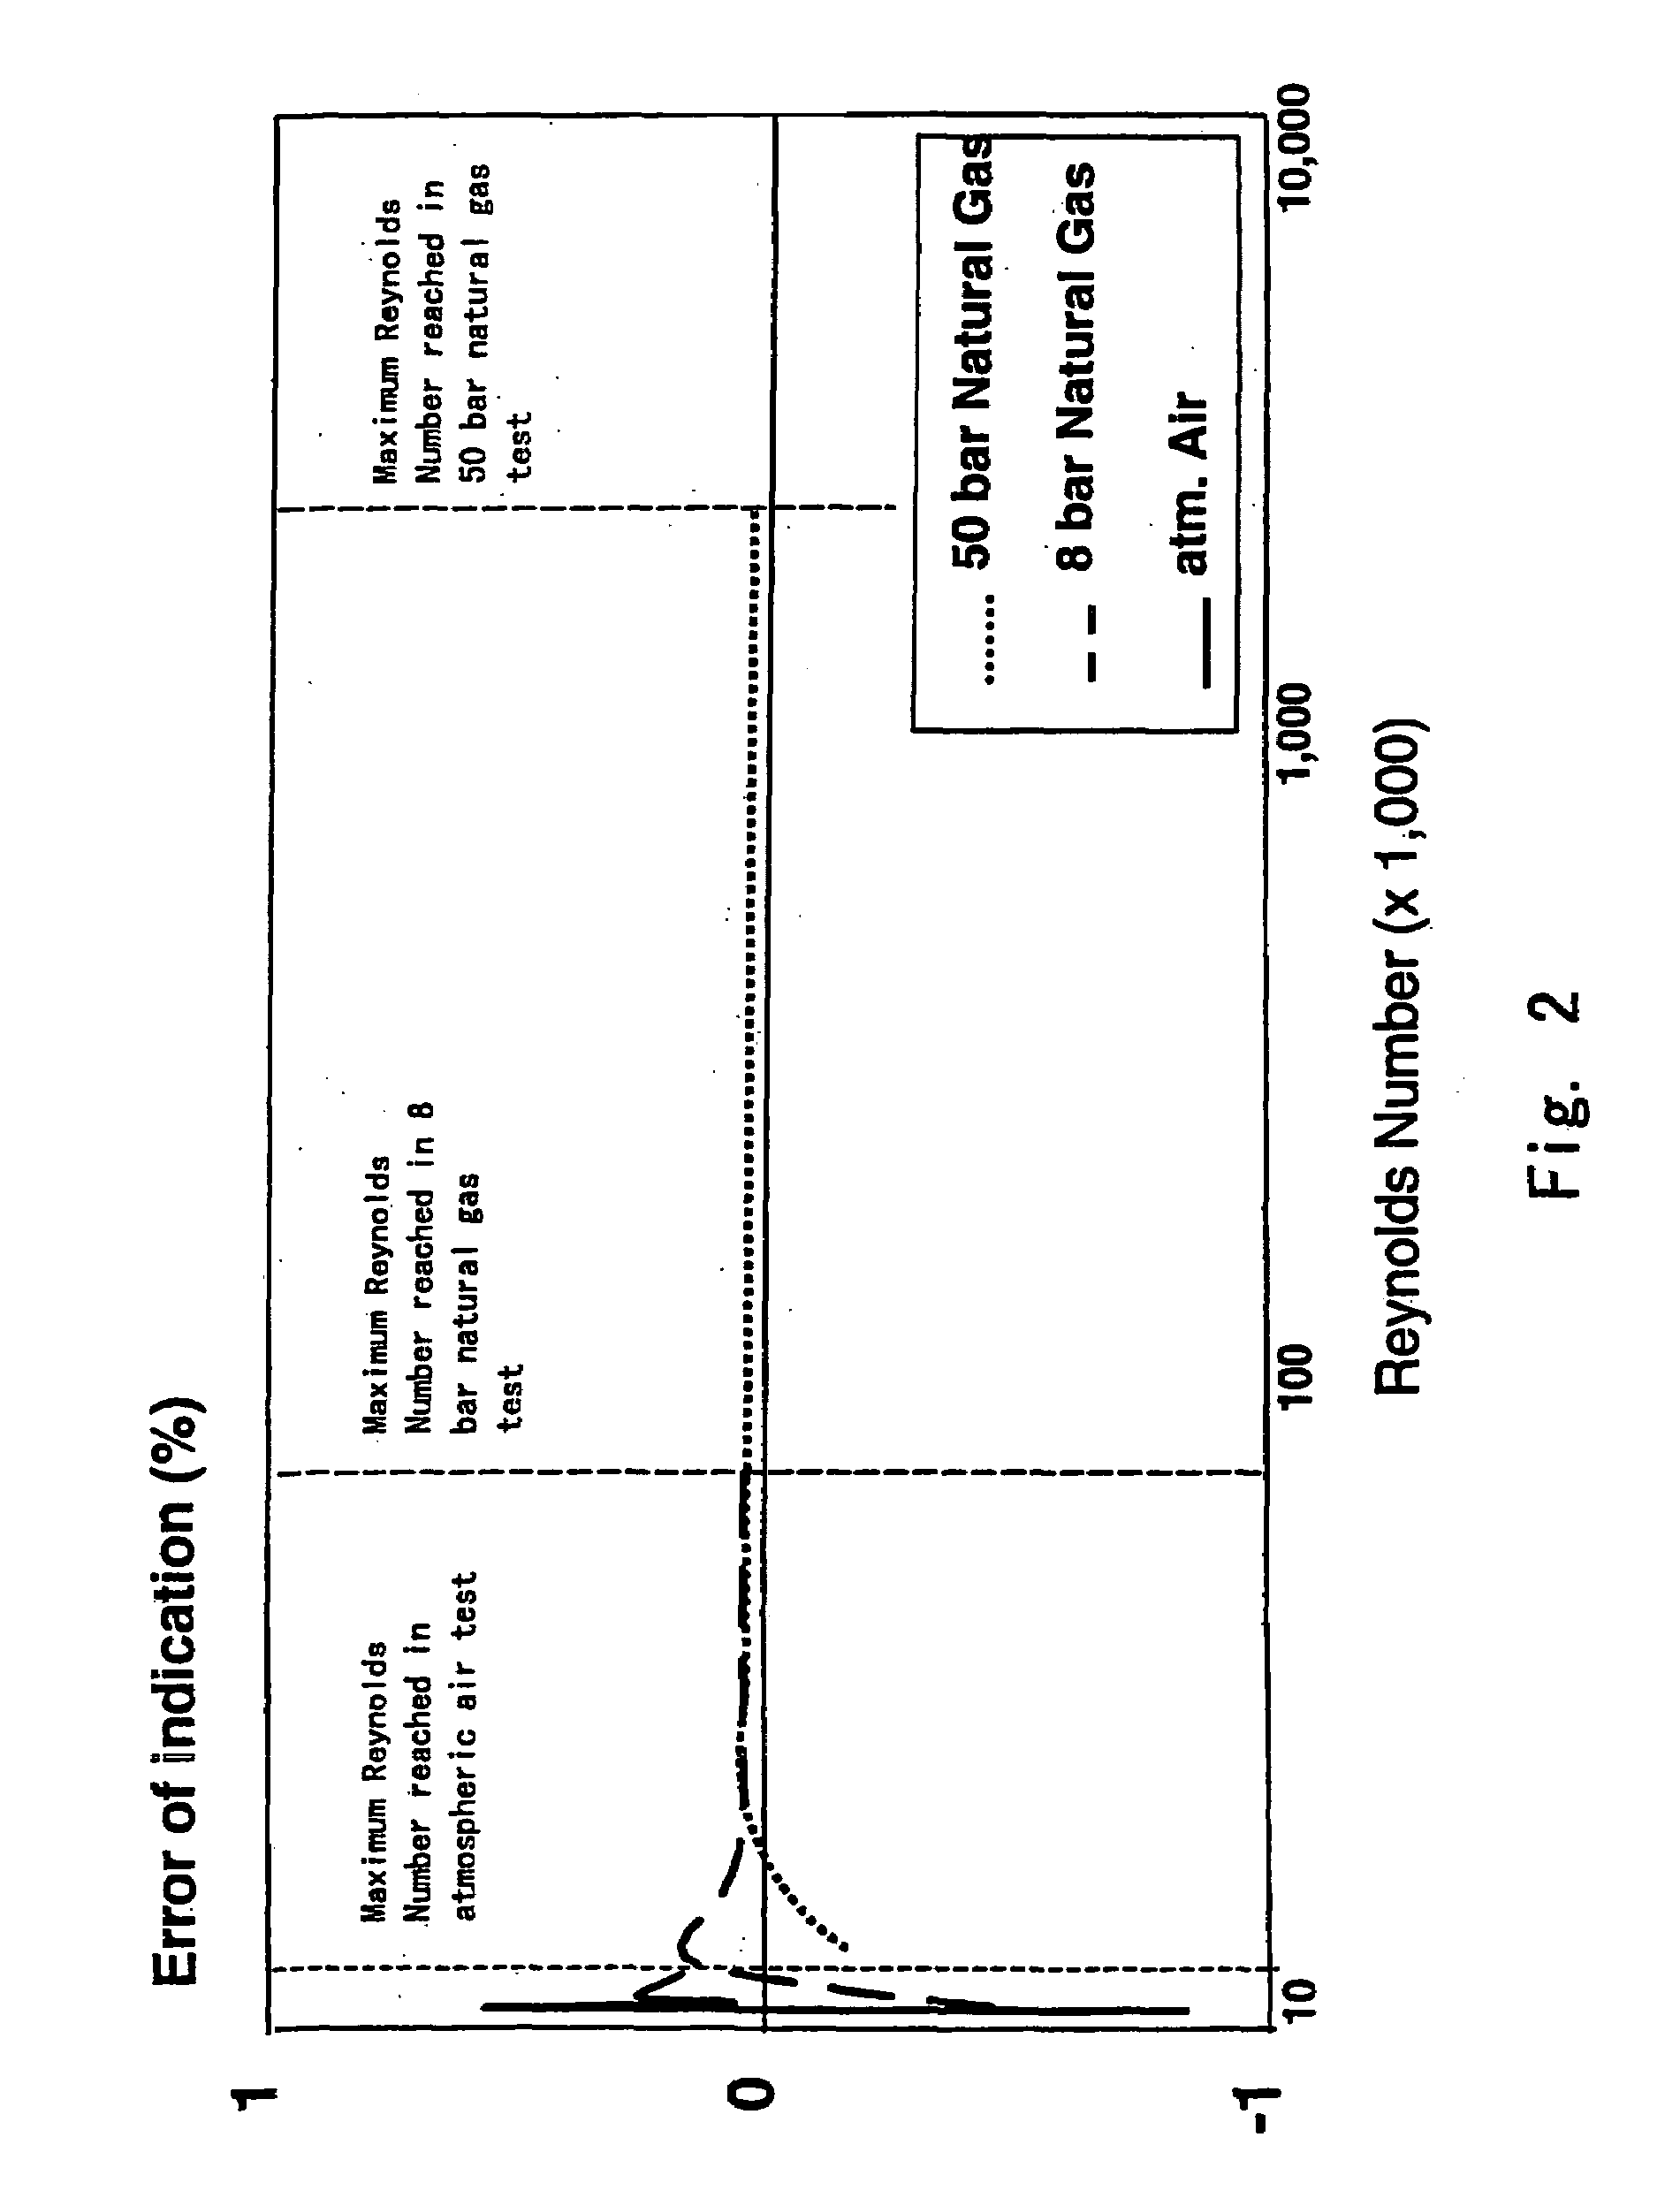 Medium, method and system for proving a turbine meter